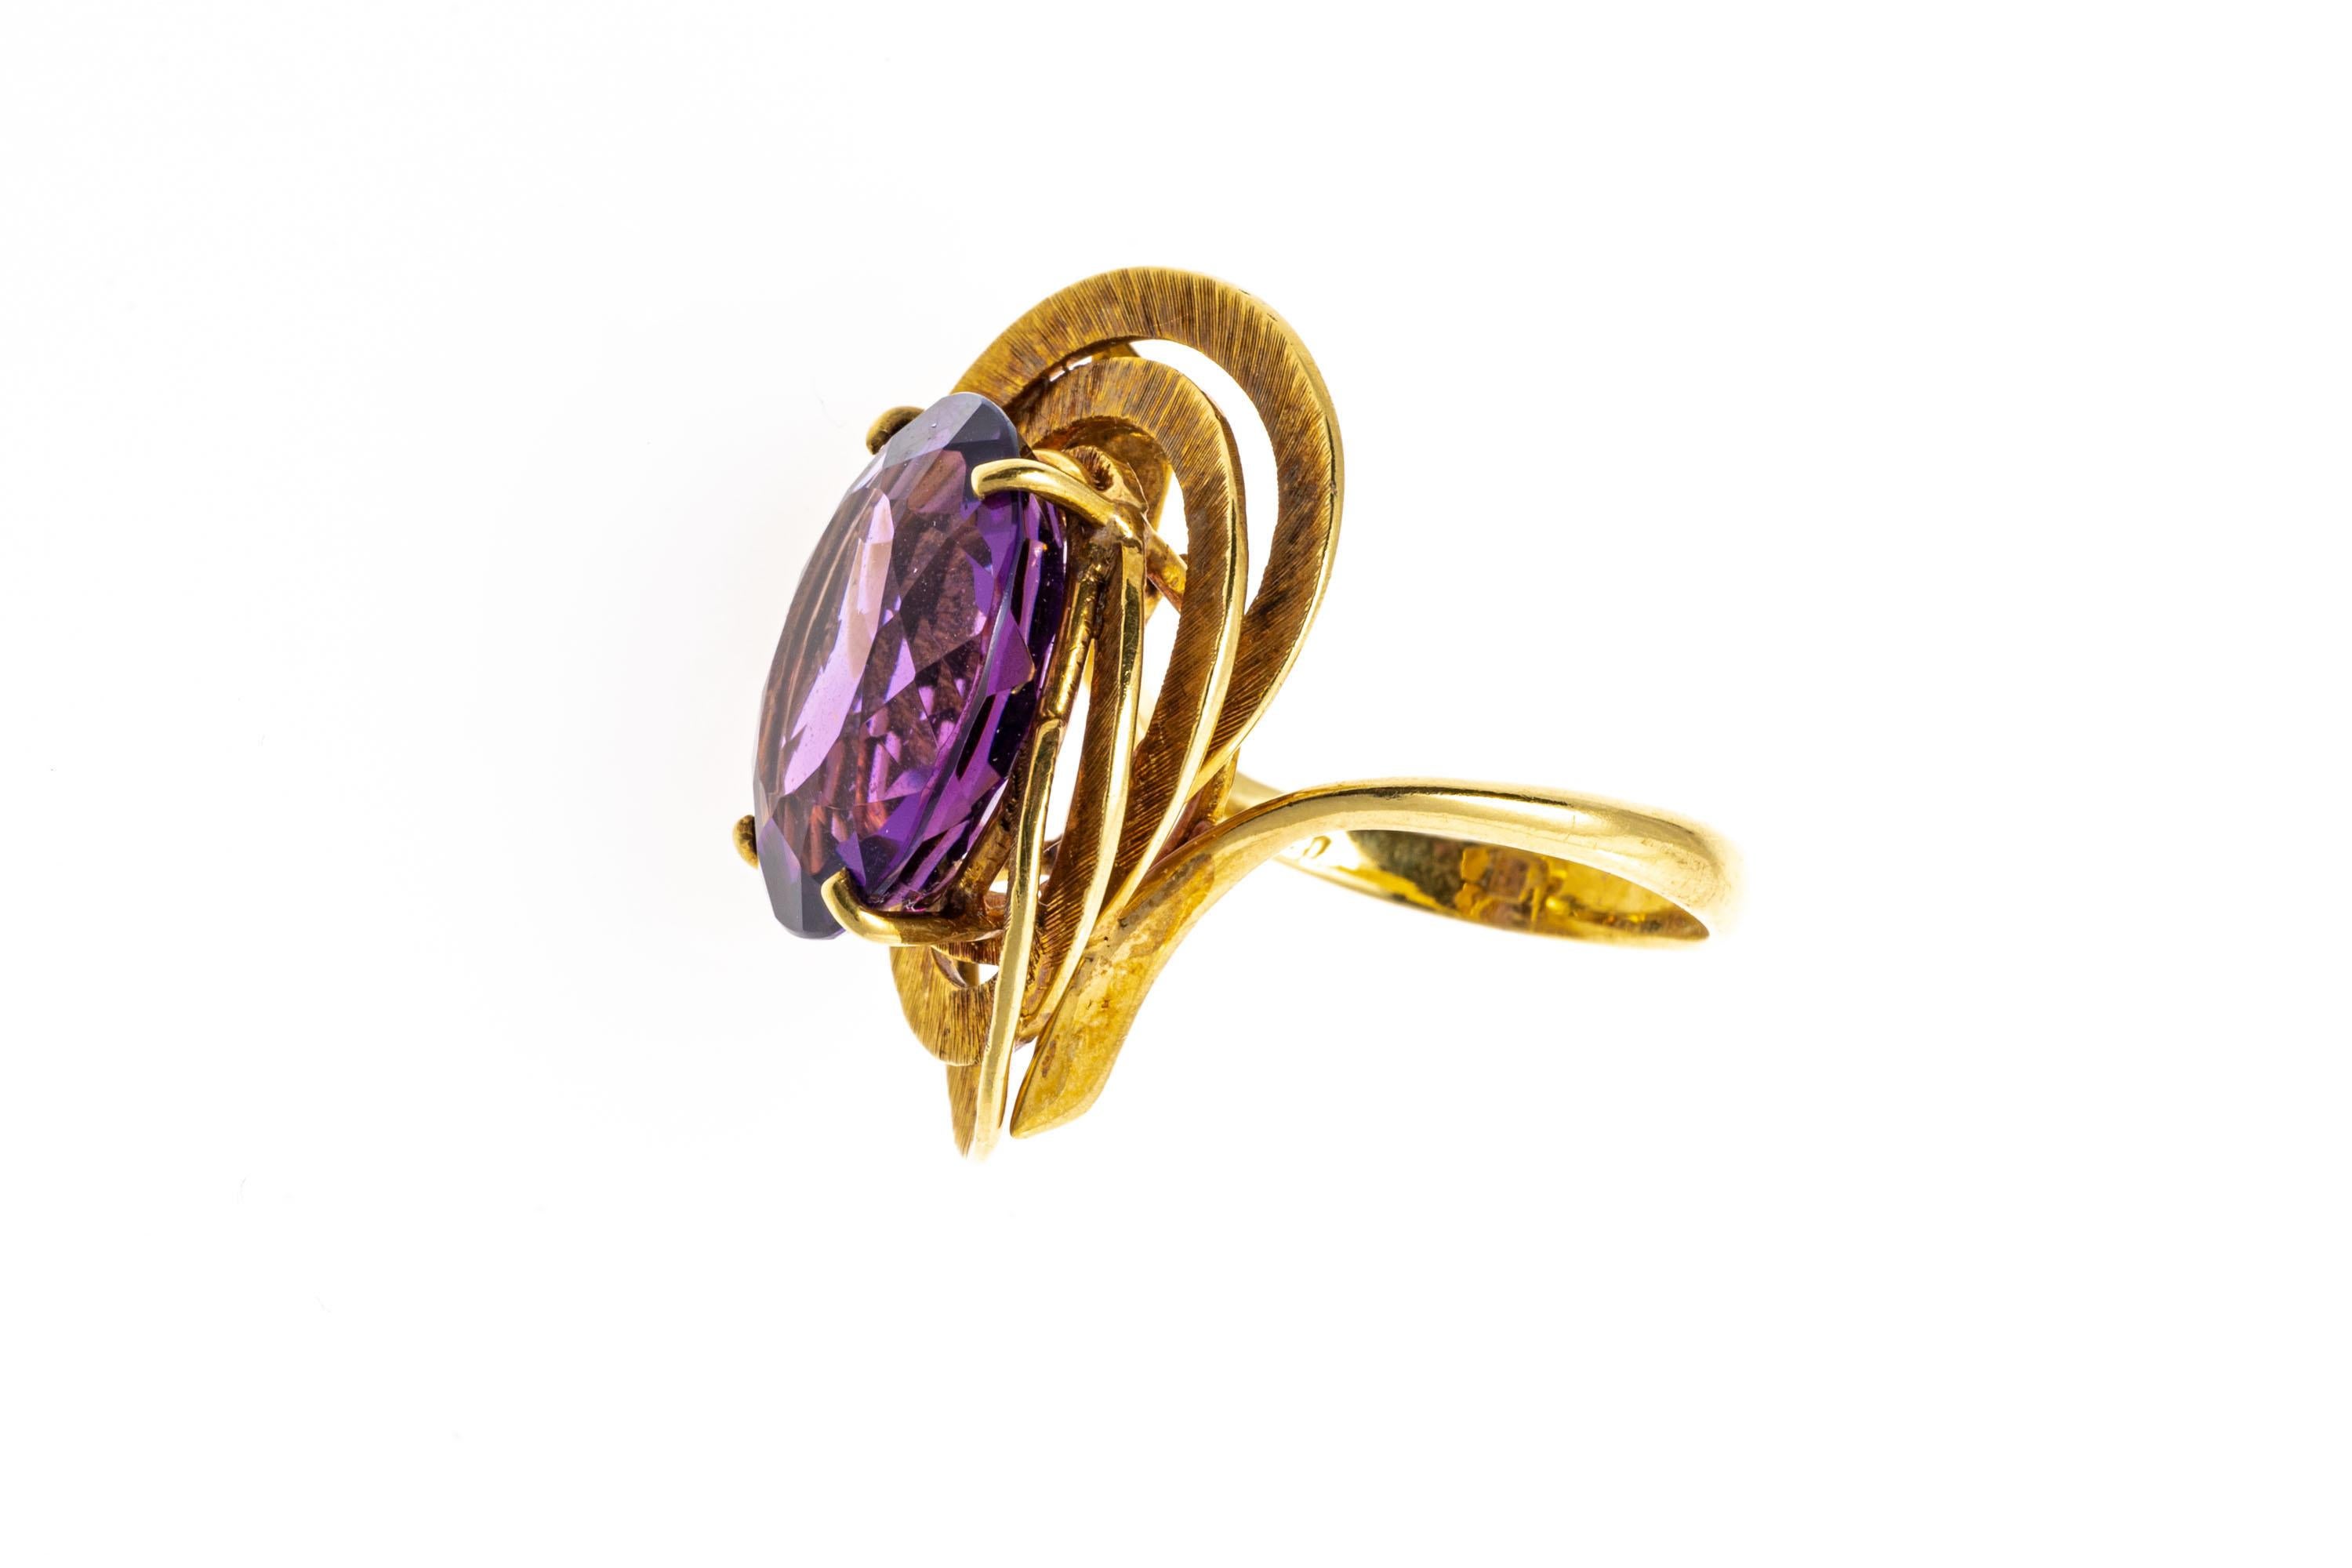 18k yellow gold ring. This eye-catching vintage ring has an oval faceted, medium to dark purple color amethyst, approximately 7.60 CTS and prong set into a bypass style shank, and decorated with a triple frame of flat, tooled wide rings.
Marks: